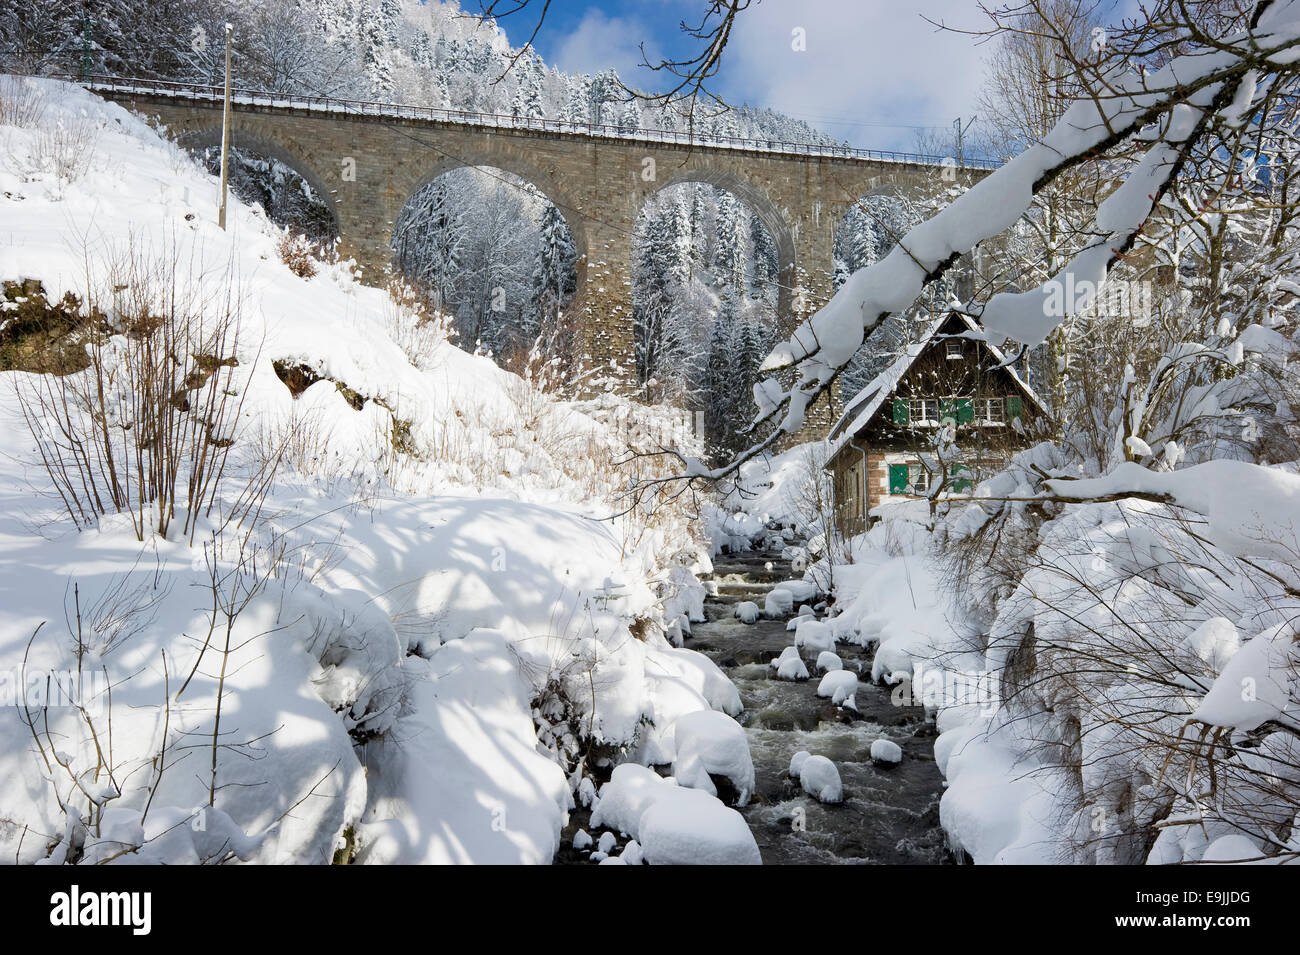 Snow-covered creek with a Black Forest house and a railway bridge, Ravenna gorge, Black Forest, Baden-Württemberg, Germany Stock Photo